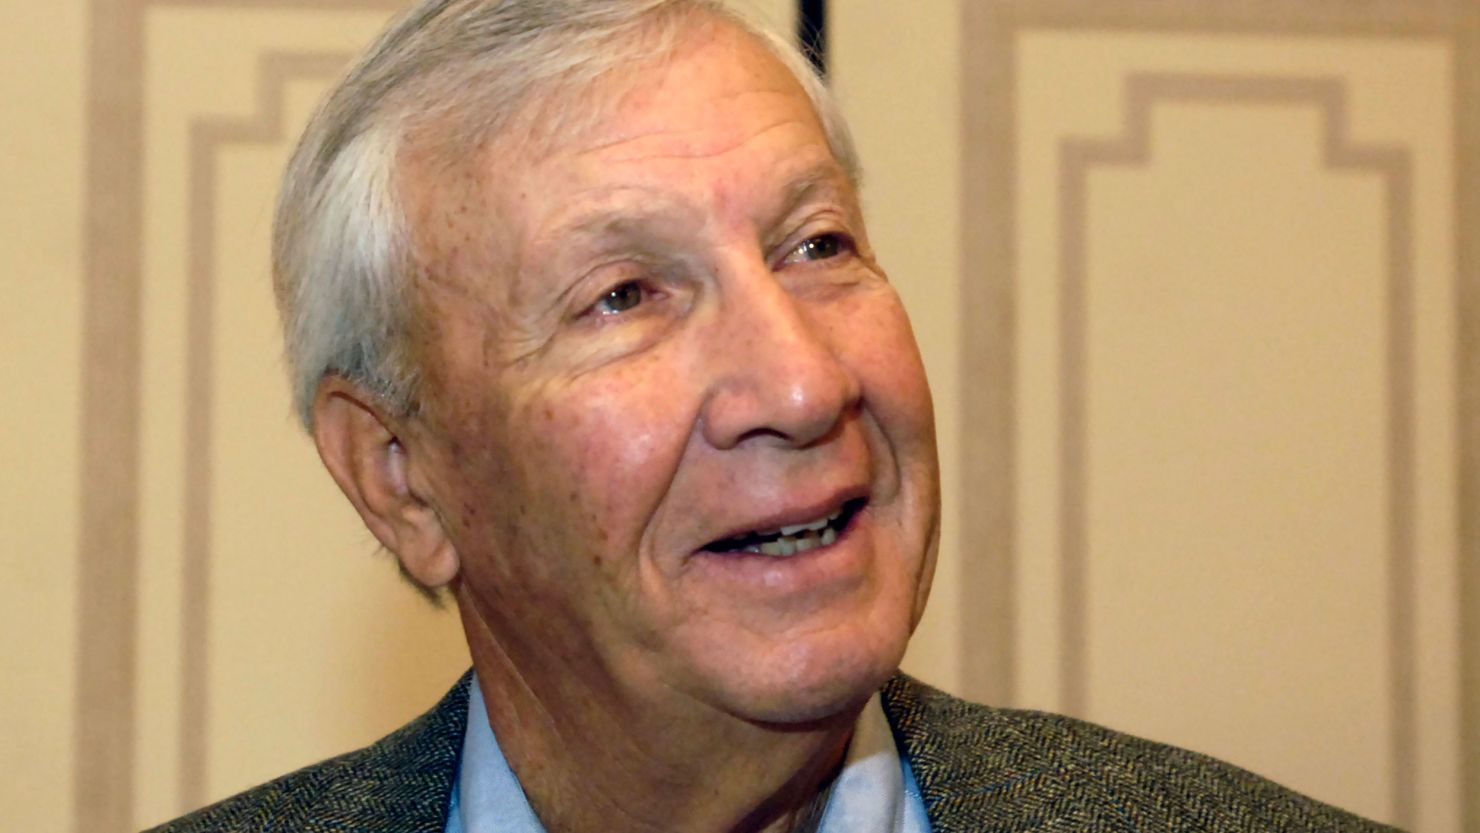 Pat Dye passed away on Monday due to kidney and liver failure.